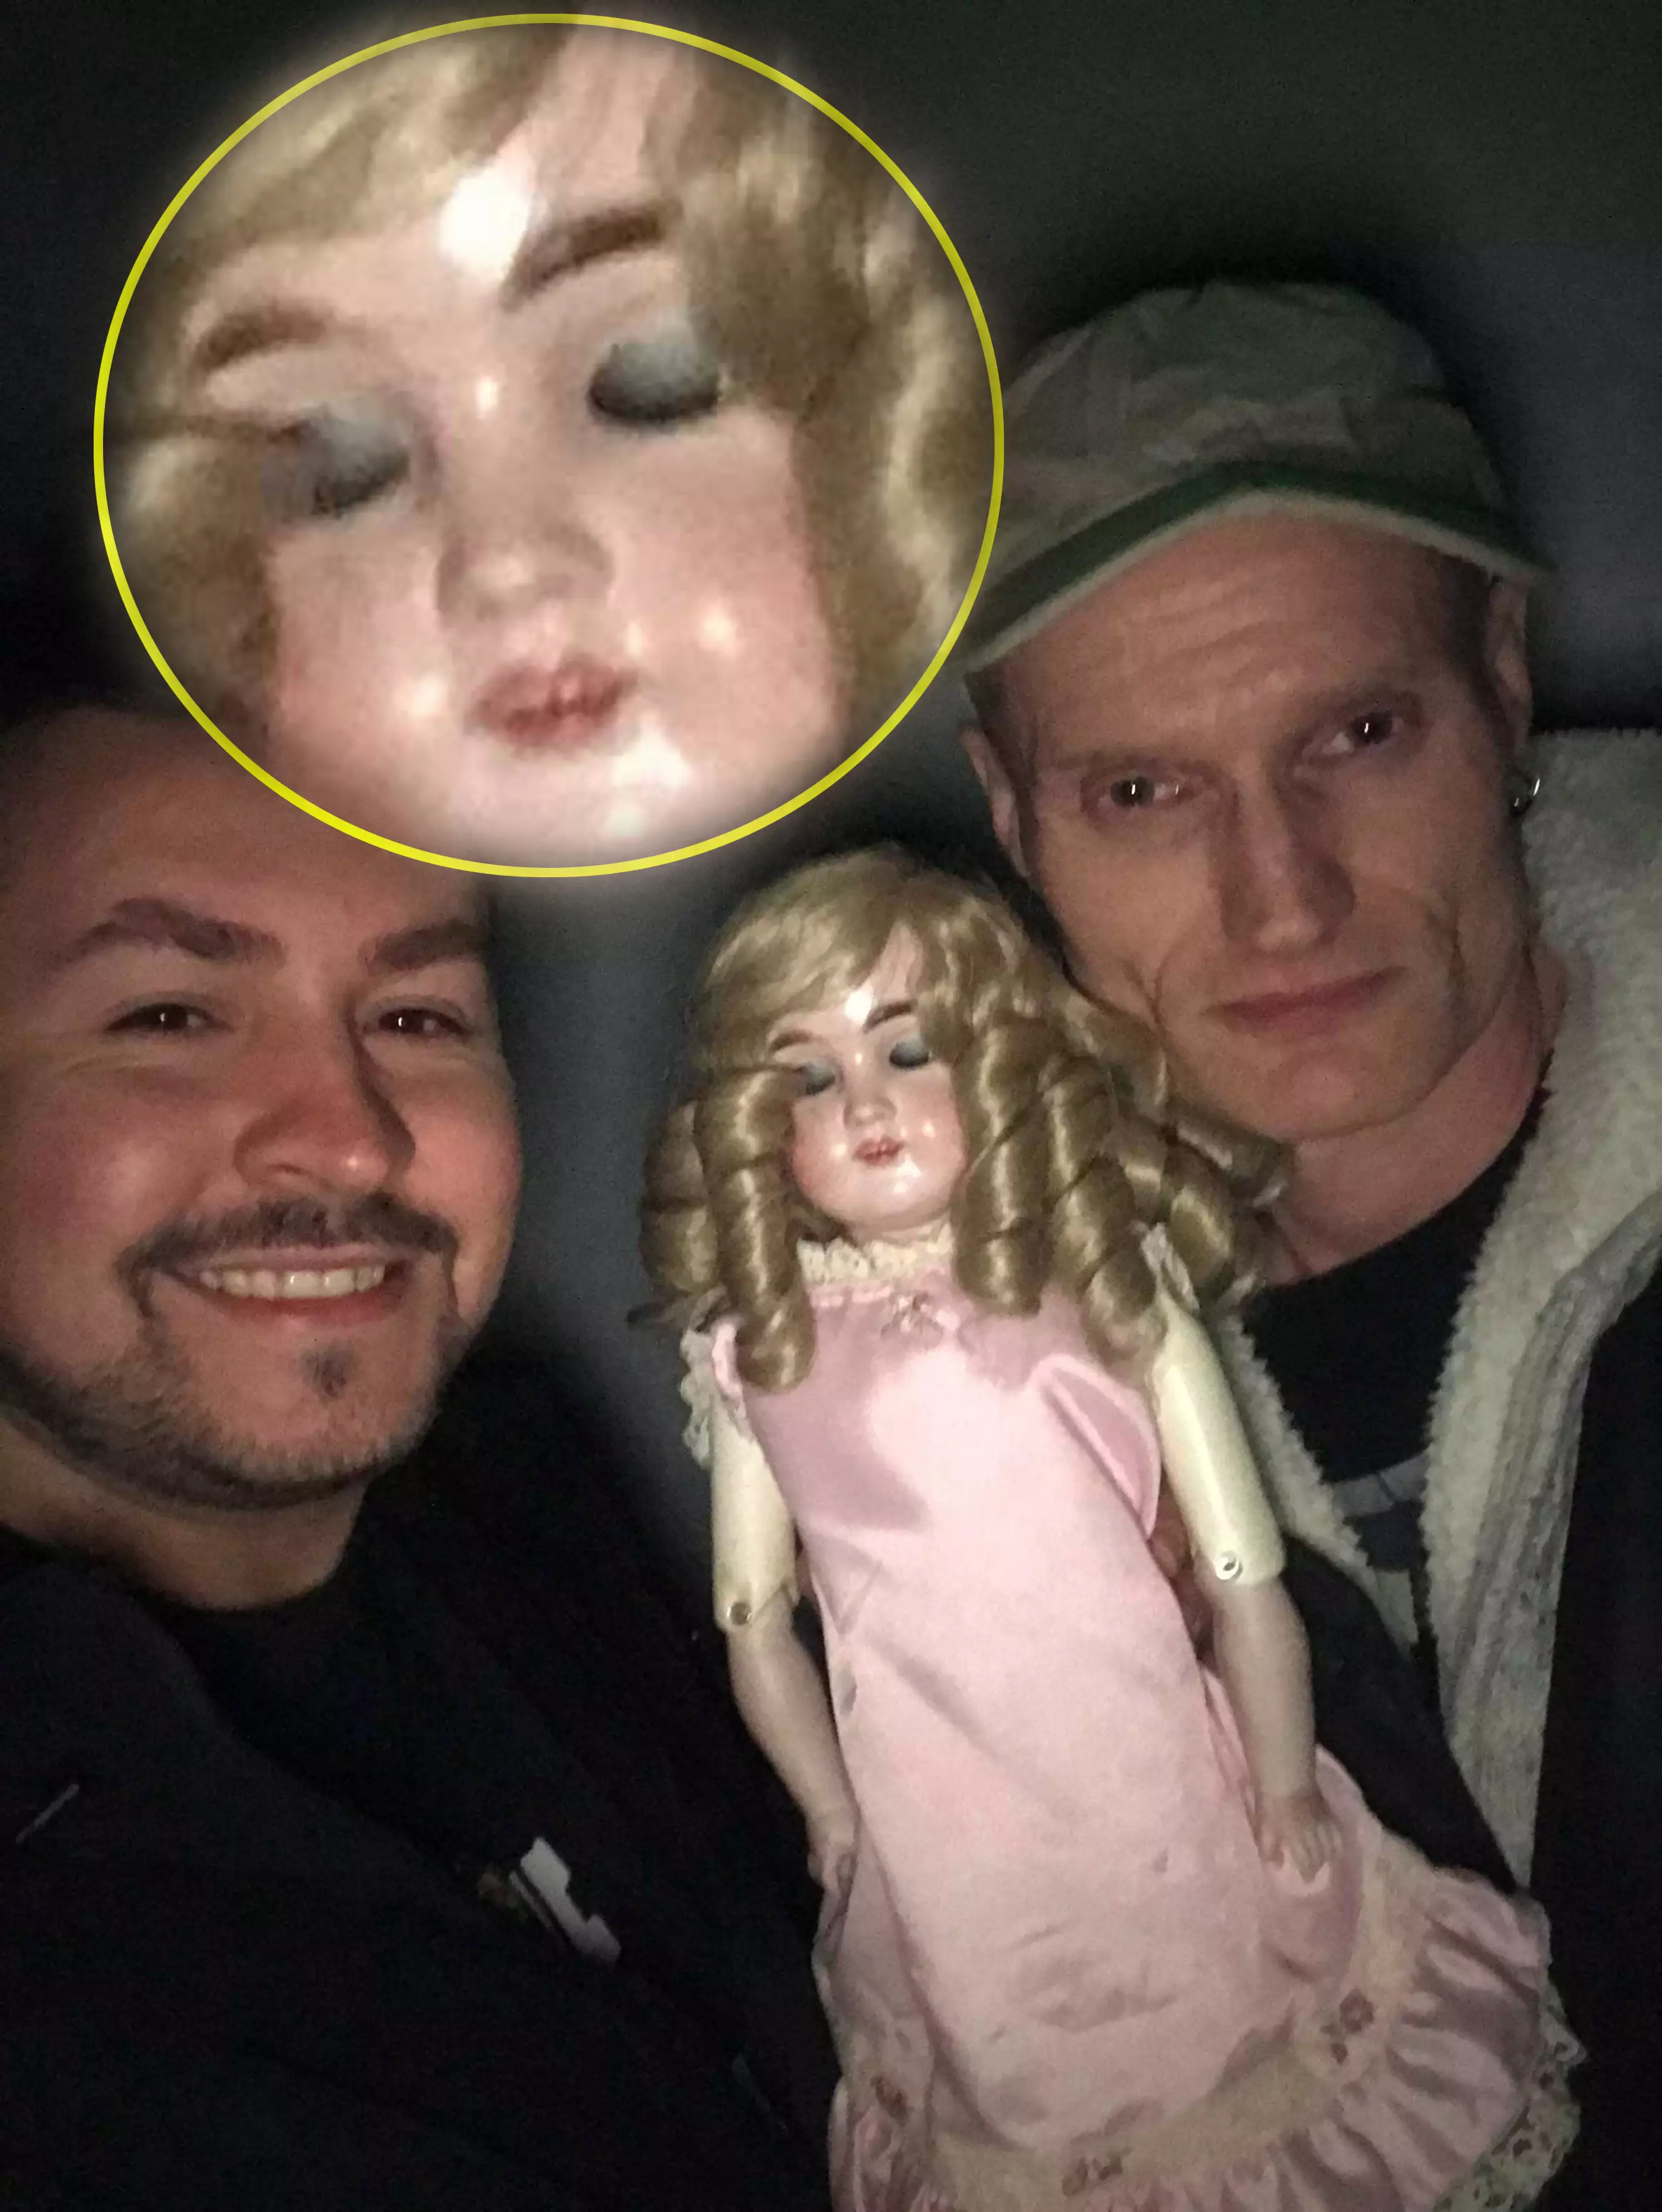 The doll appeared to blink in the photo, despite having no eyelids.